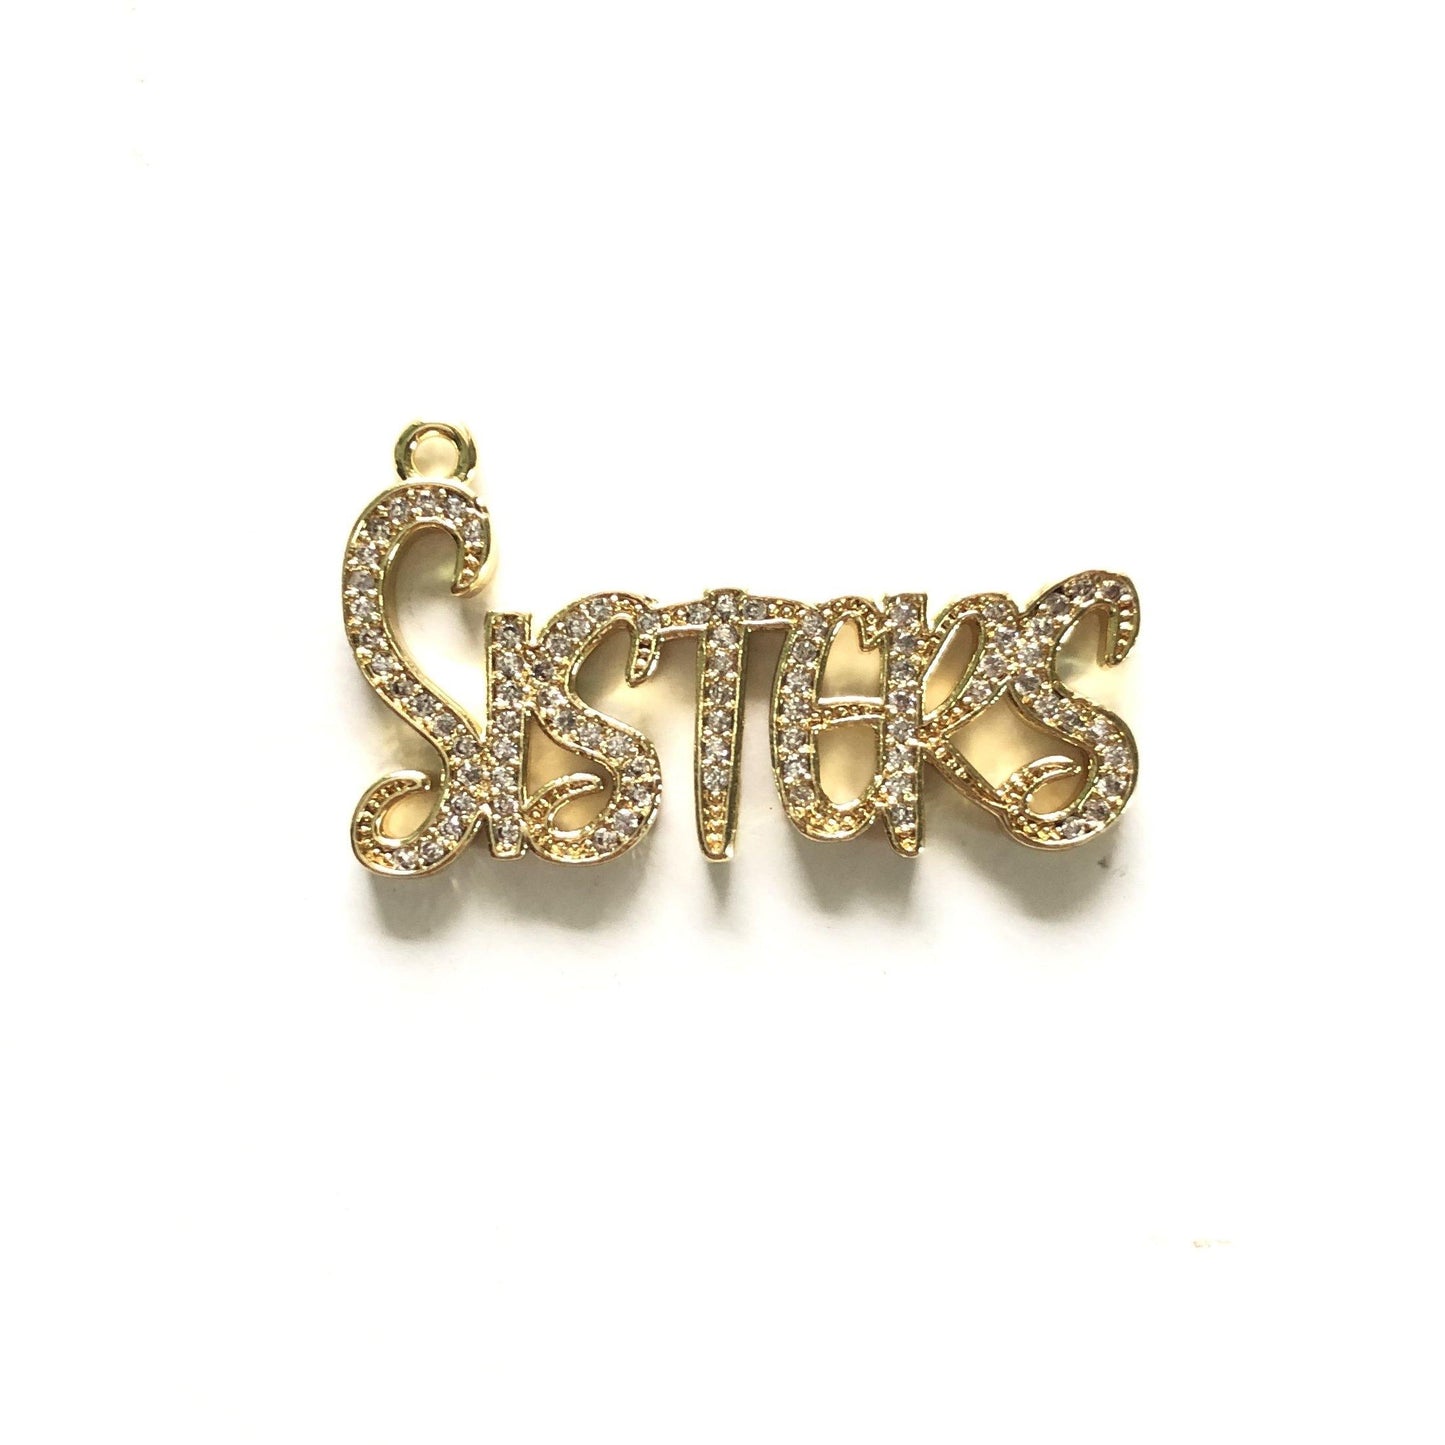 10pcs/lot 34.5*20mm CZ Paved Sisters Charms Gold CZ Paved Charms Words & Quotes Charms Beads Beyond